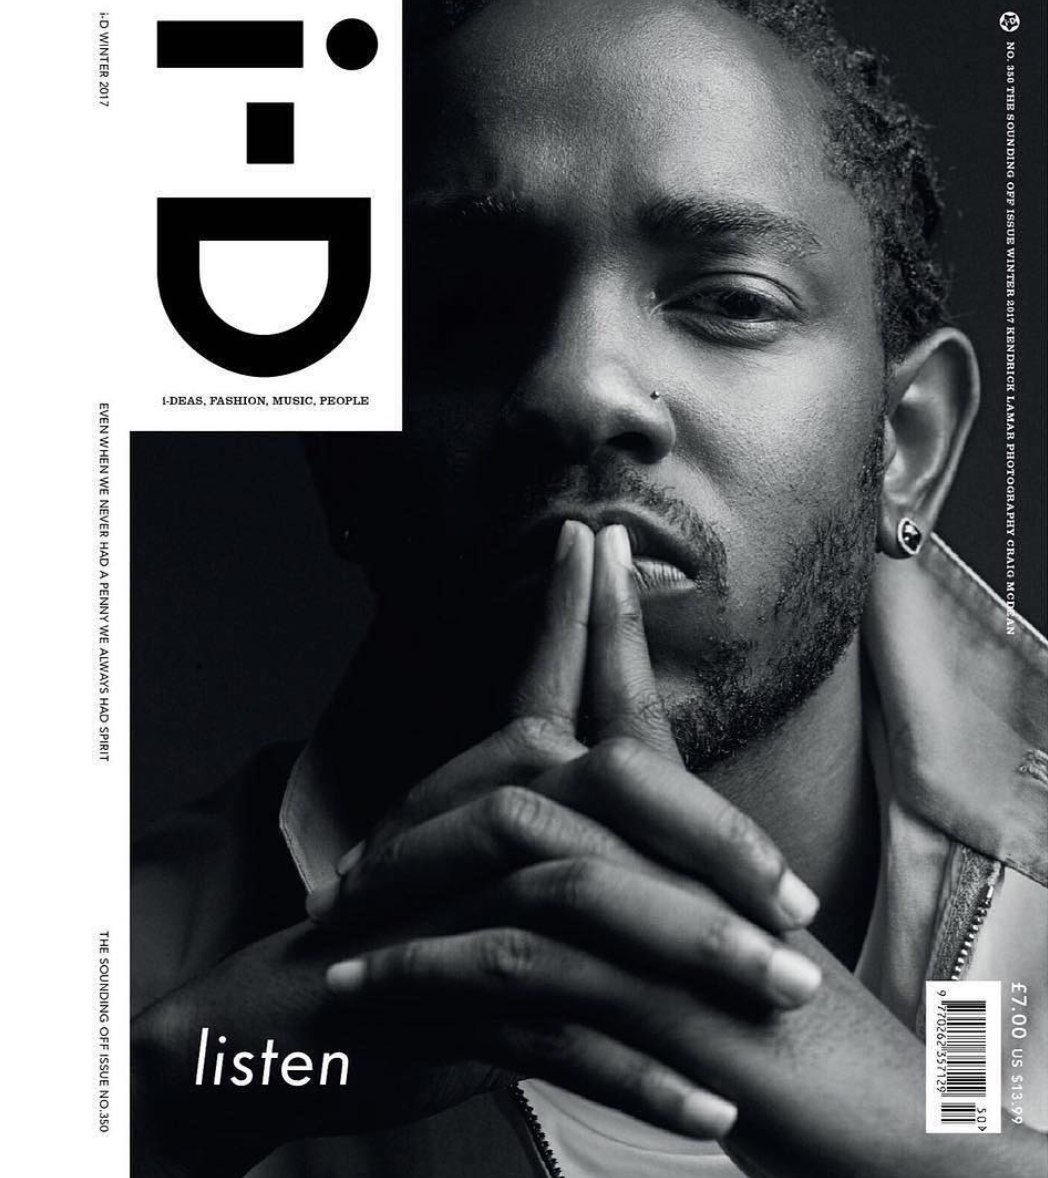 Kendrick Lamar Style Fashion Black And White 8x10 Picture